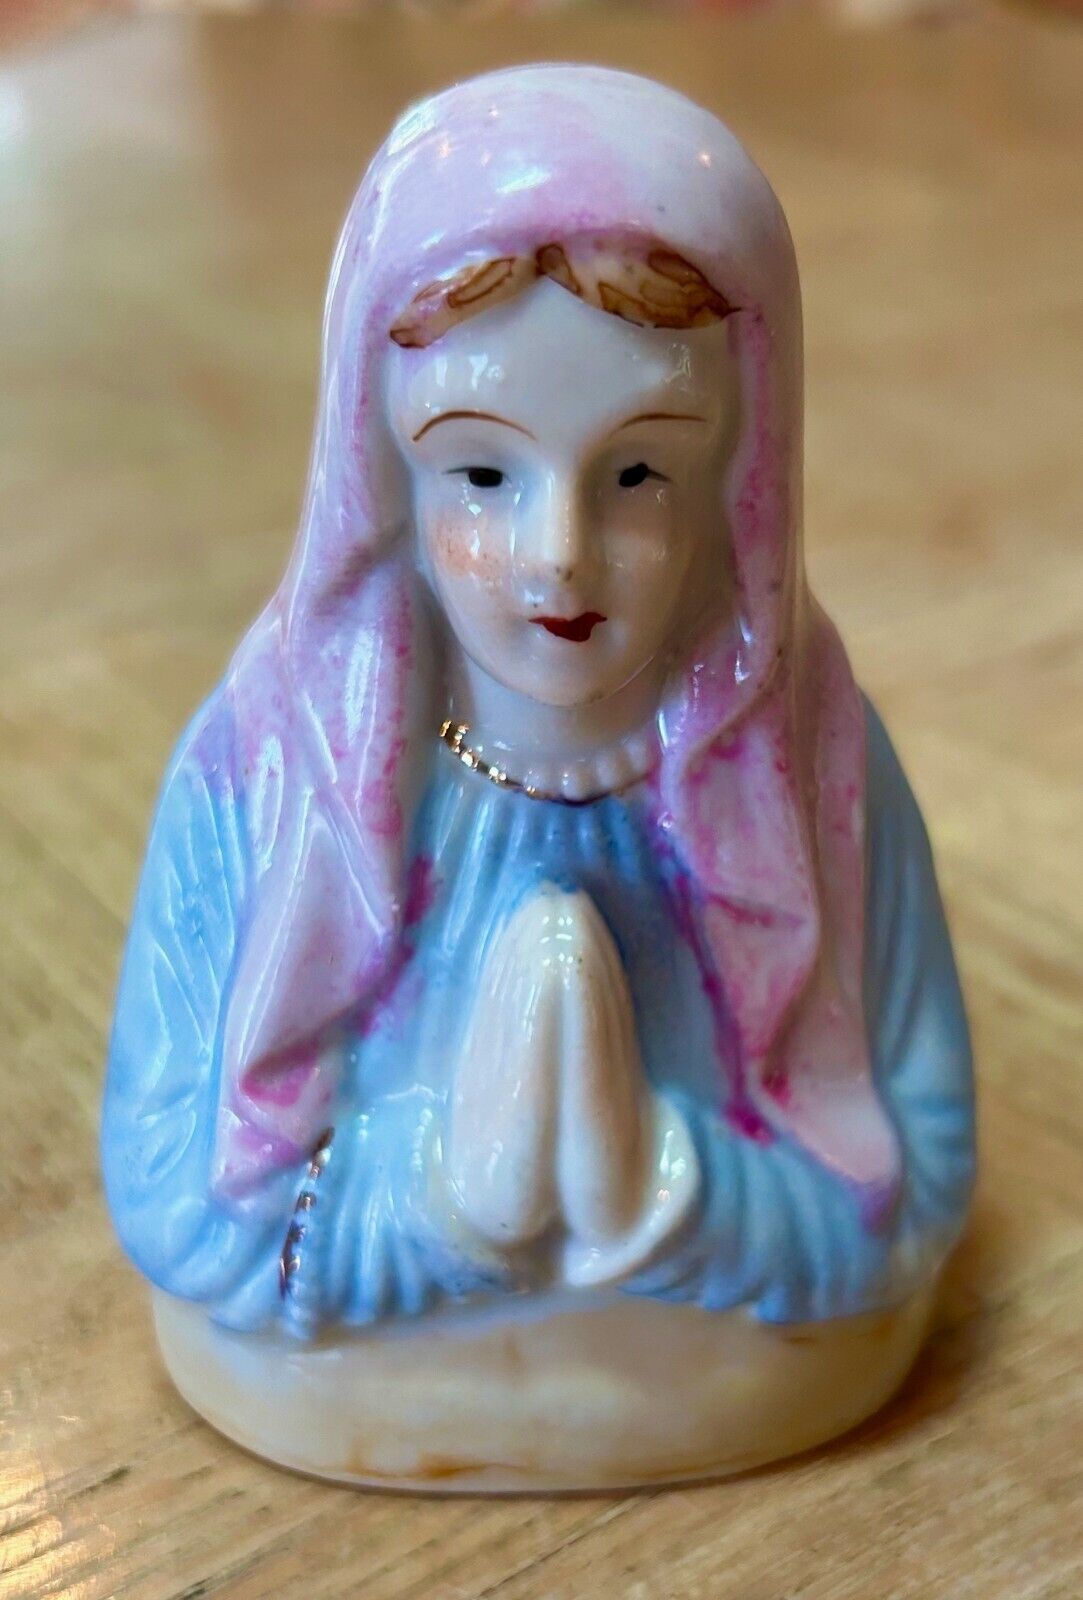 VINTAGE PASTEL MADONNA VIRGIN MARY BUST FIGURINE 3 1/2 INCHES MADE IN JAPAN